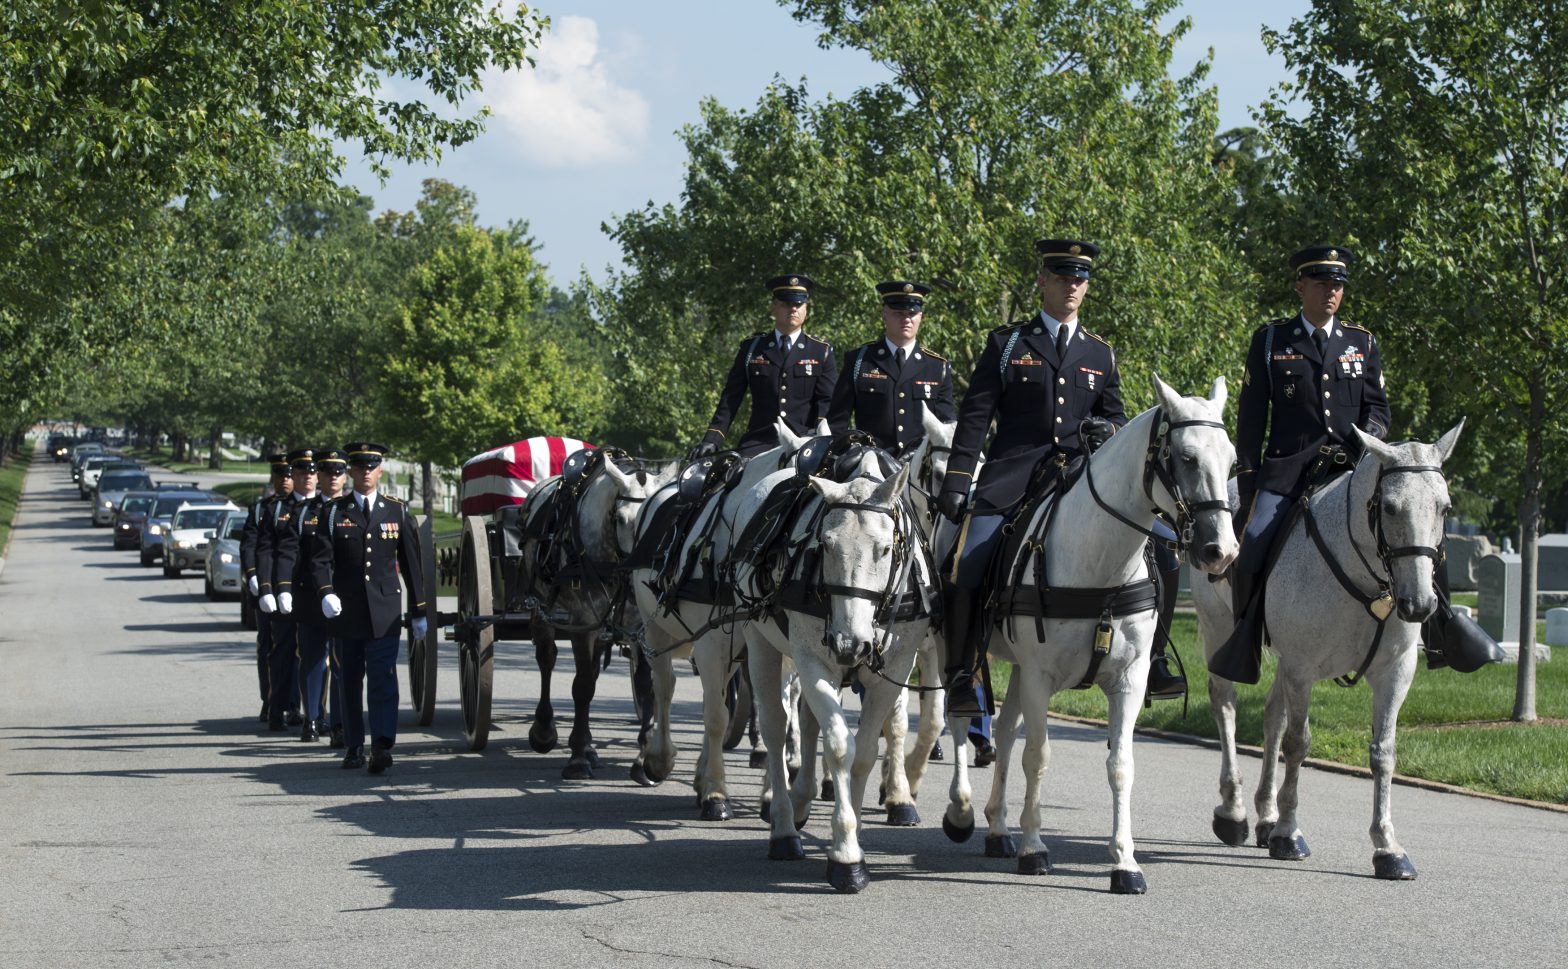 After Arlington National Cemetery Horse Deaths, Army Makes Changes